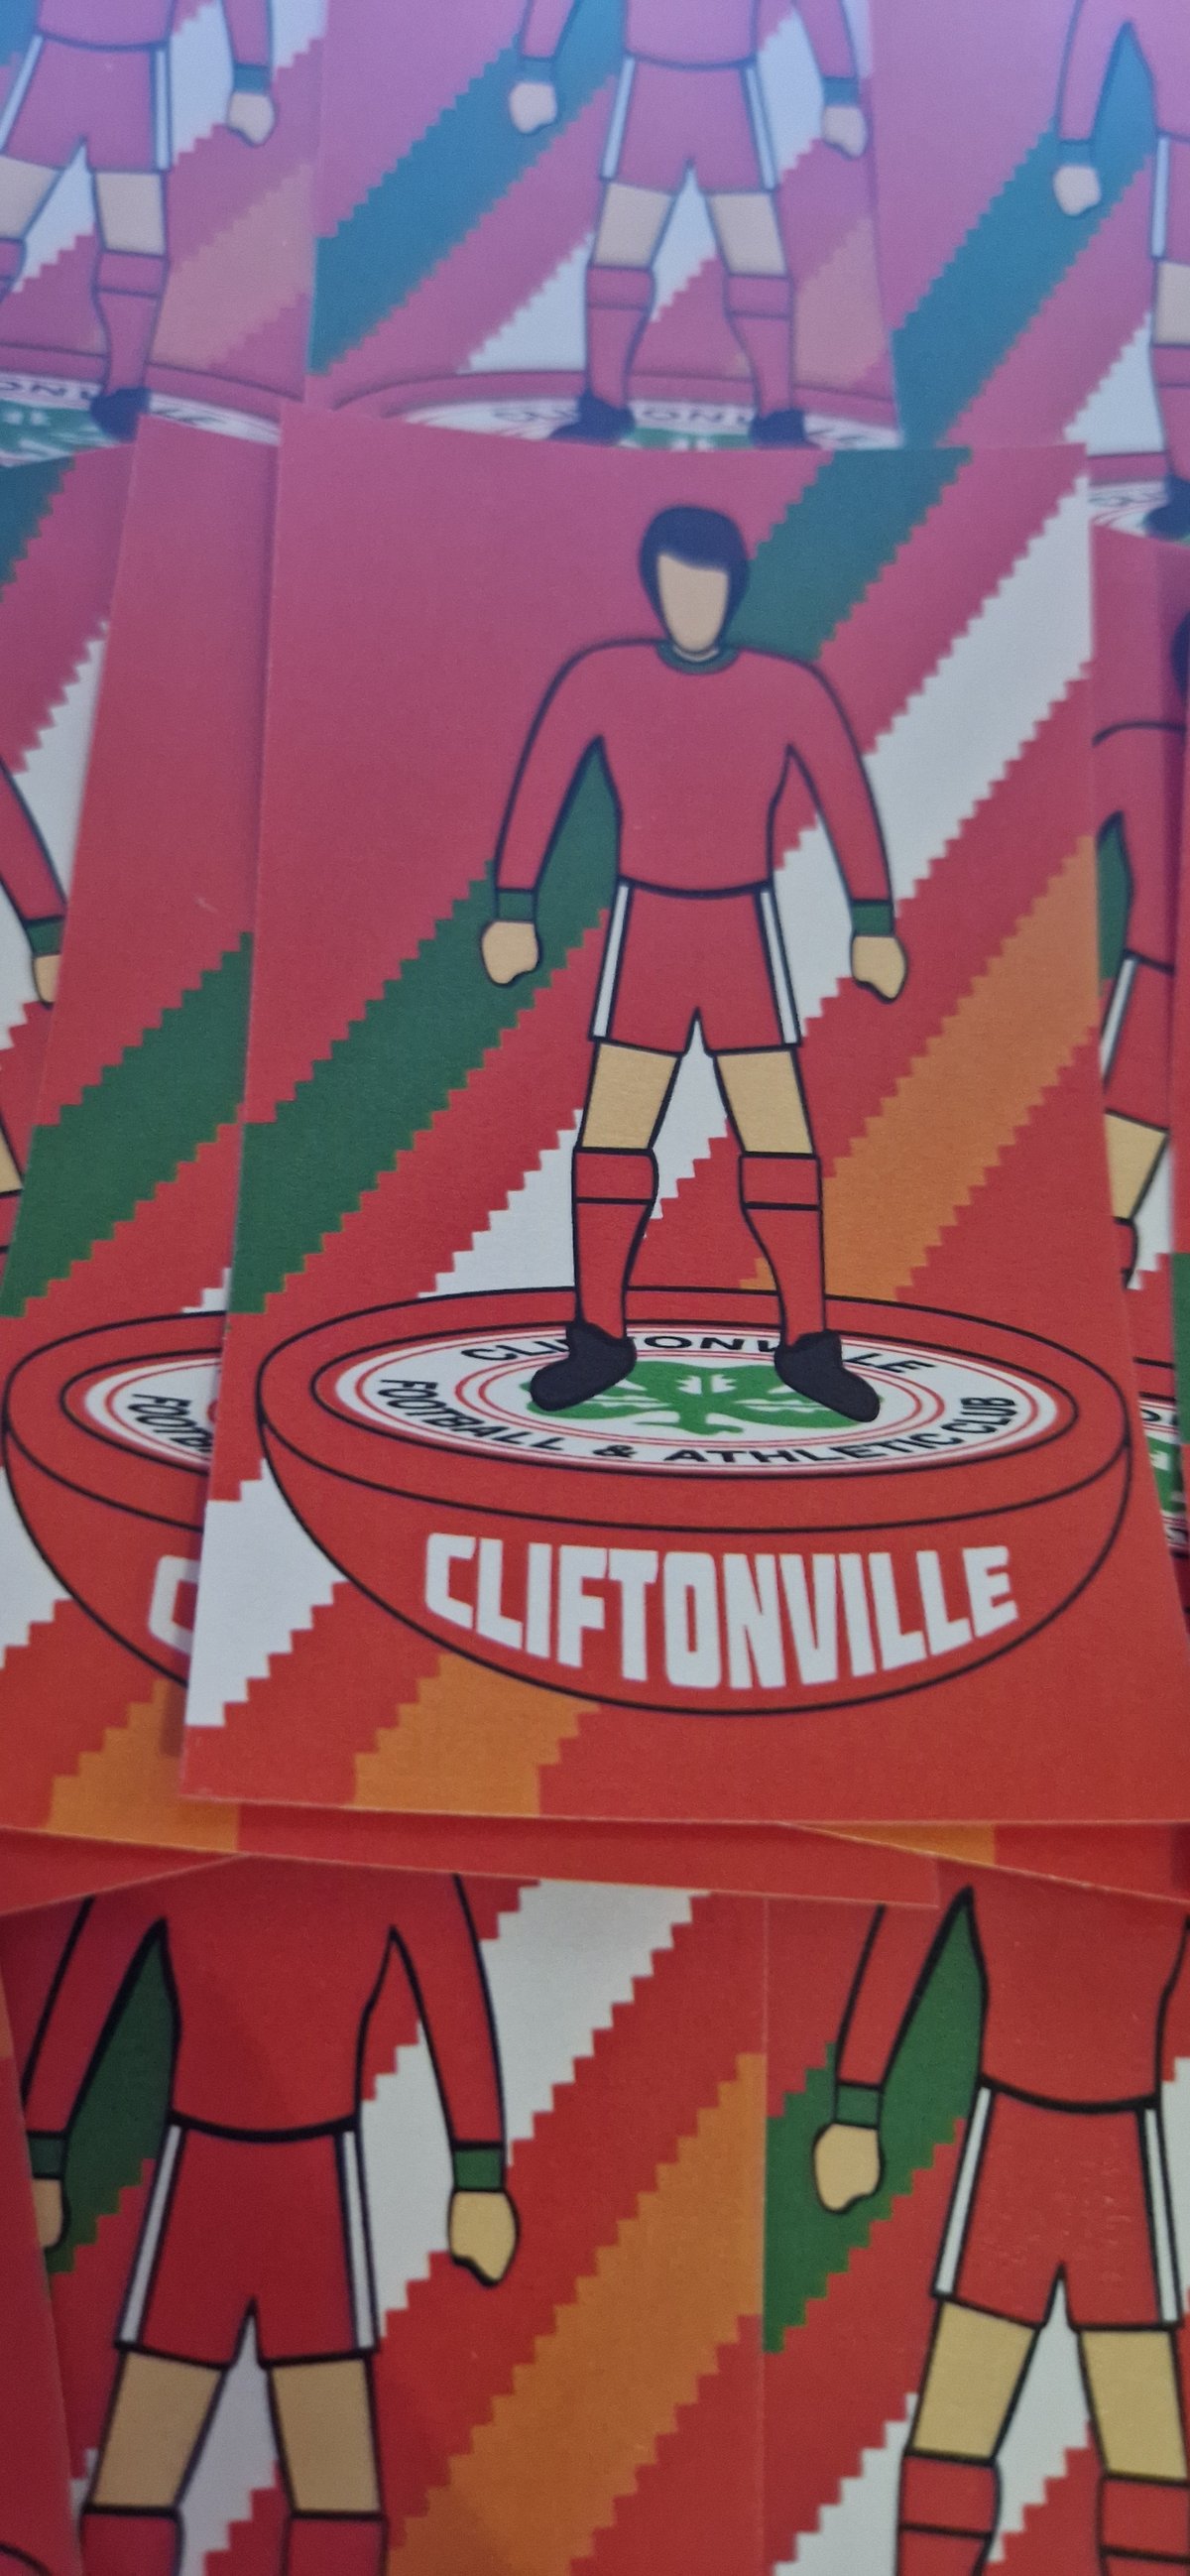 Pack of 25 10x6cm Cliftonville Football/Ultras Stickers.